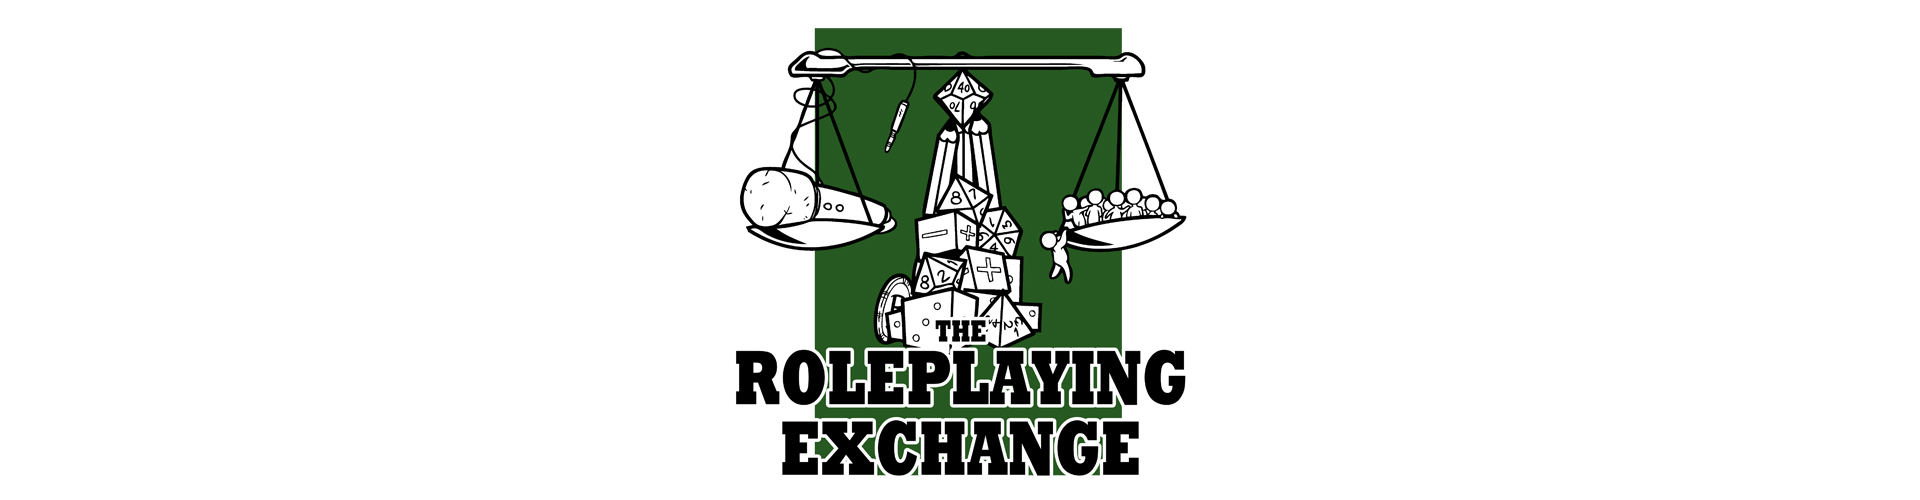 The Roleplaying Exchange Podcast